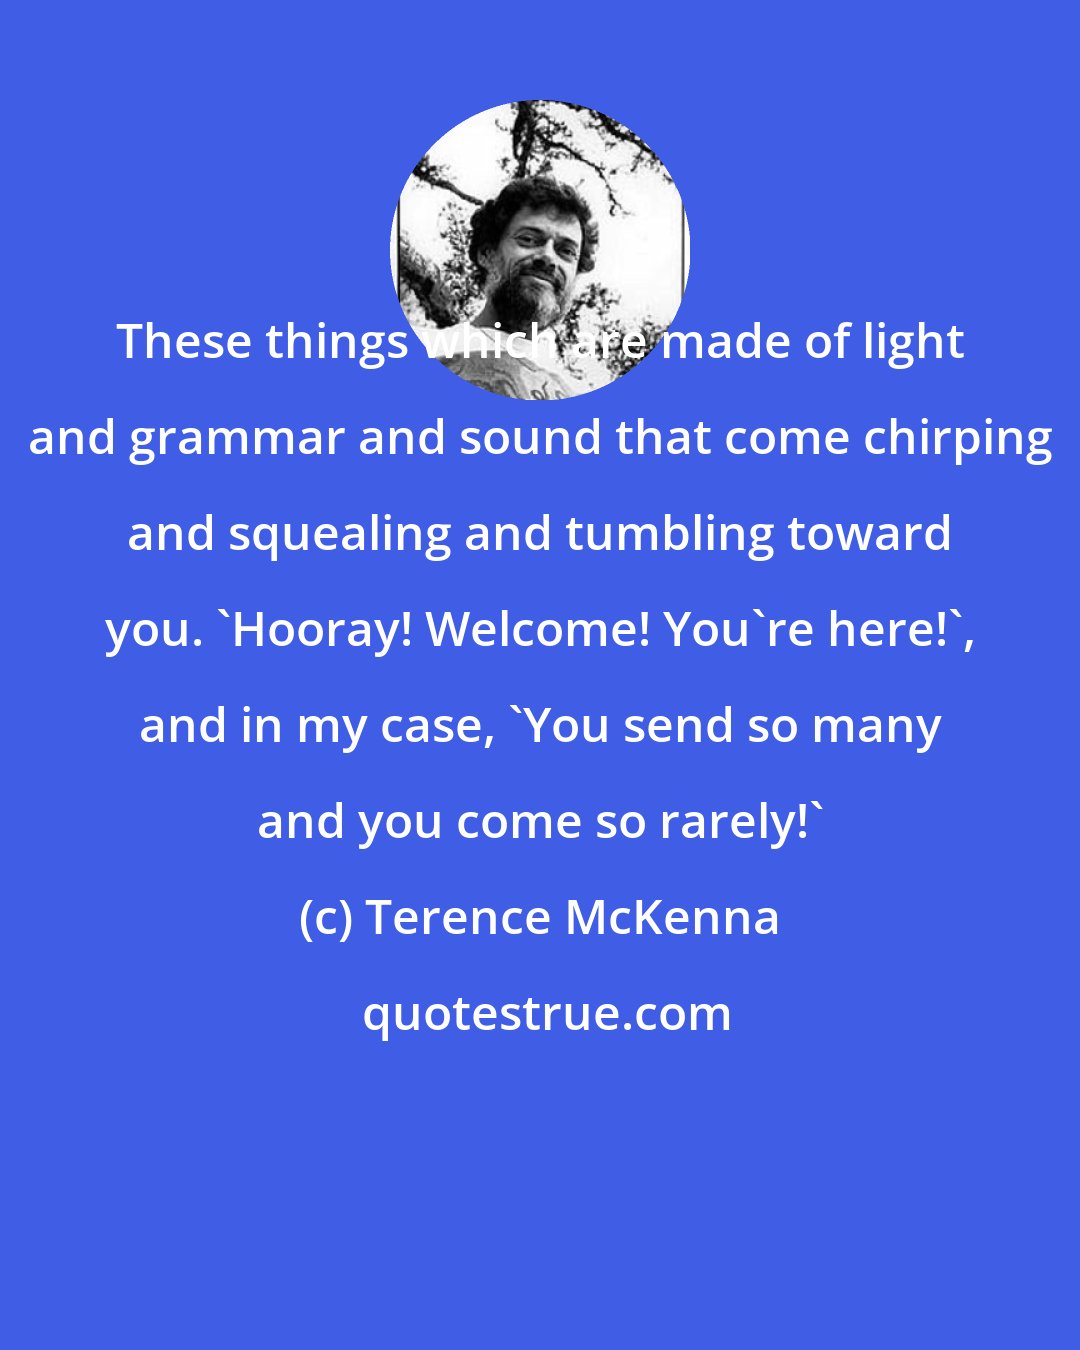 Terence McKenna: These things which are made of light and grammar and sound that come chirping and squealing and tumbling toward you. 'Hooray! Welcome! You're here!', and in my case, 'You send so many and you come so rarely!'